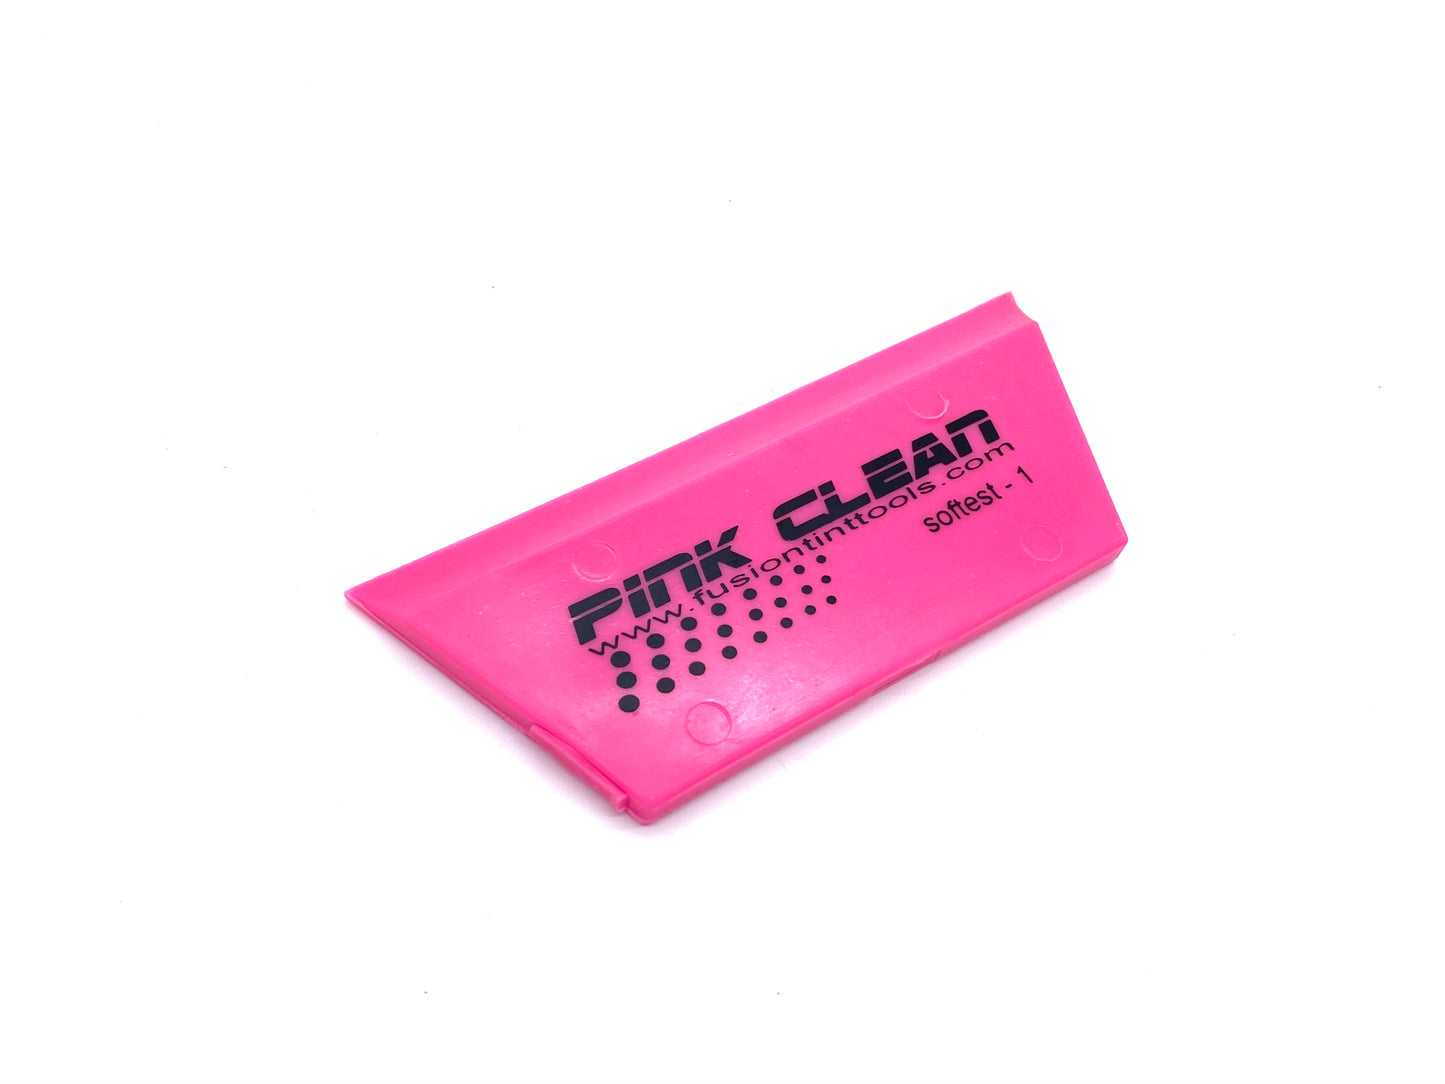 The Fusion 5" Pink Squeegee against a neutral background, highlighting its unique pink color and application precision.